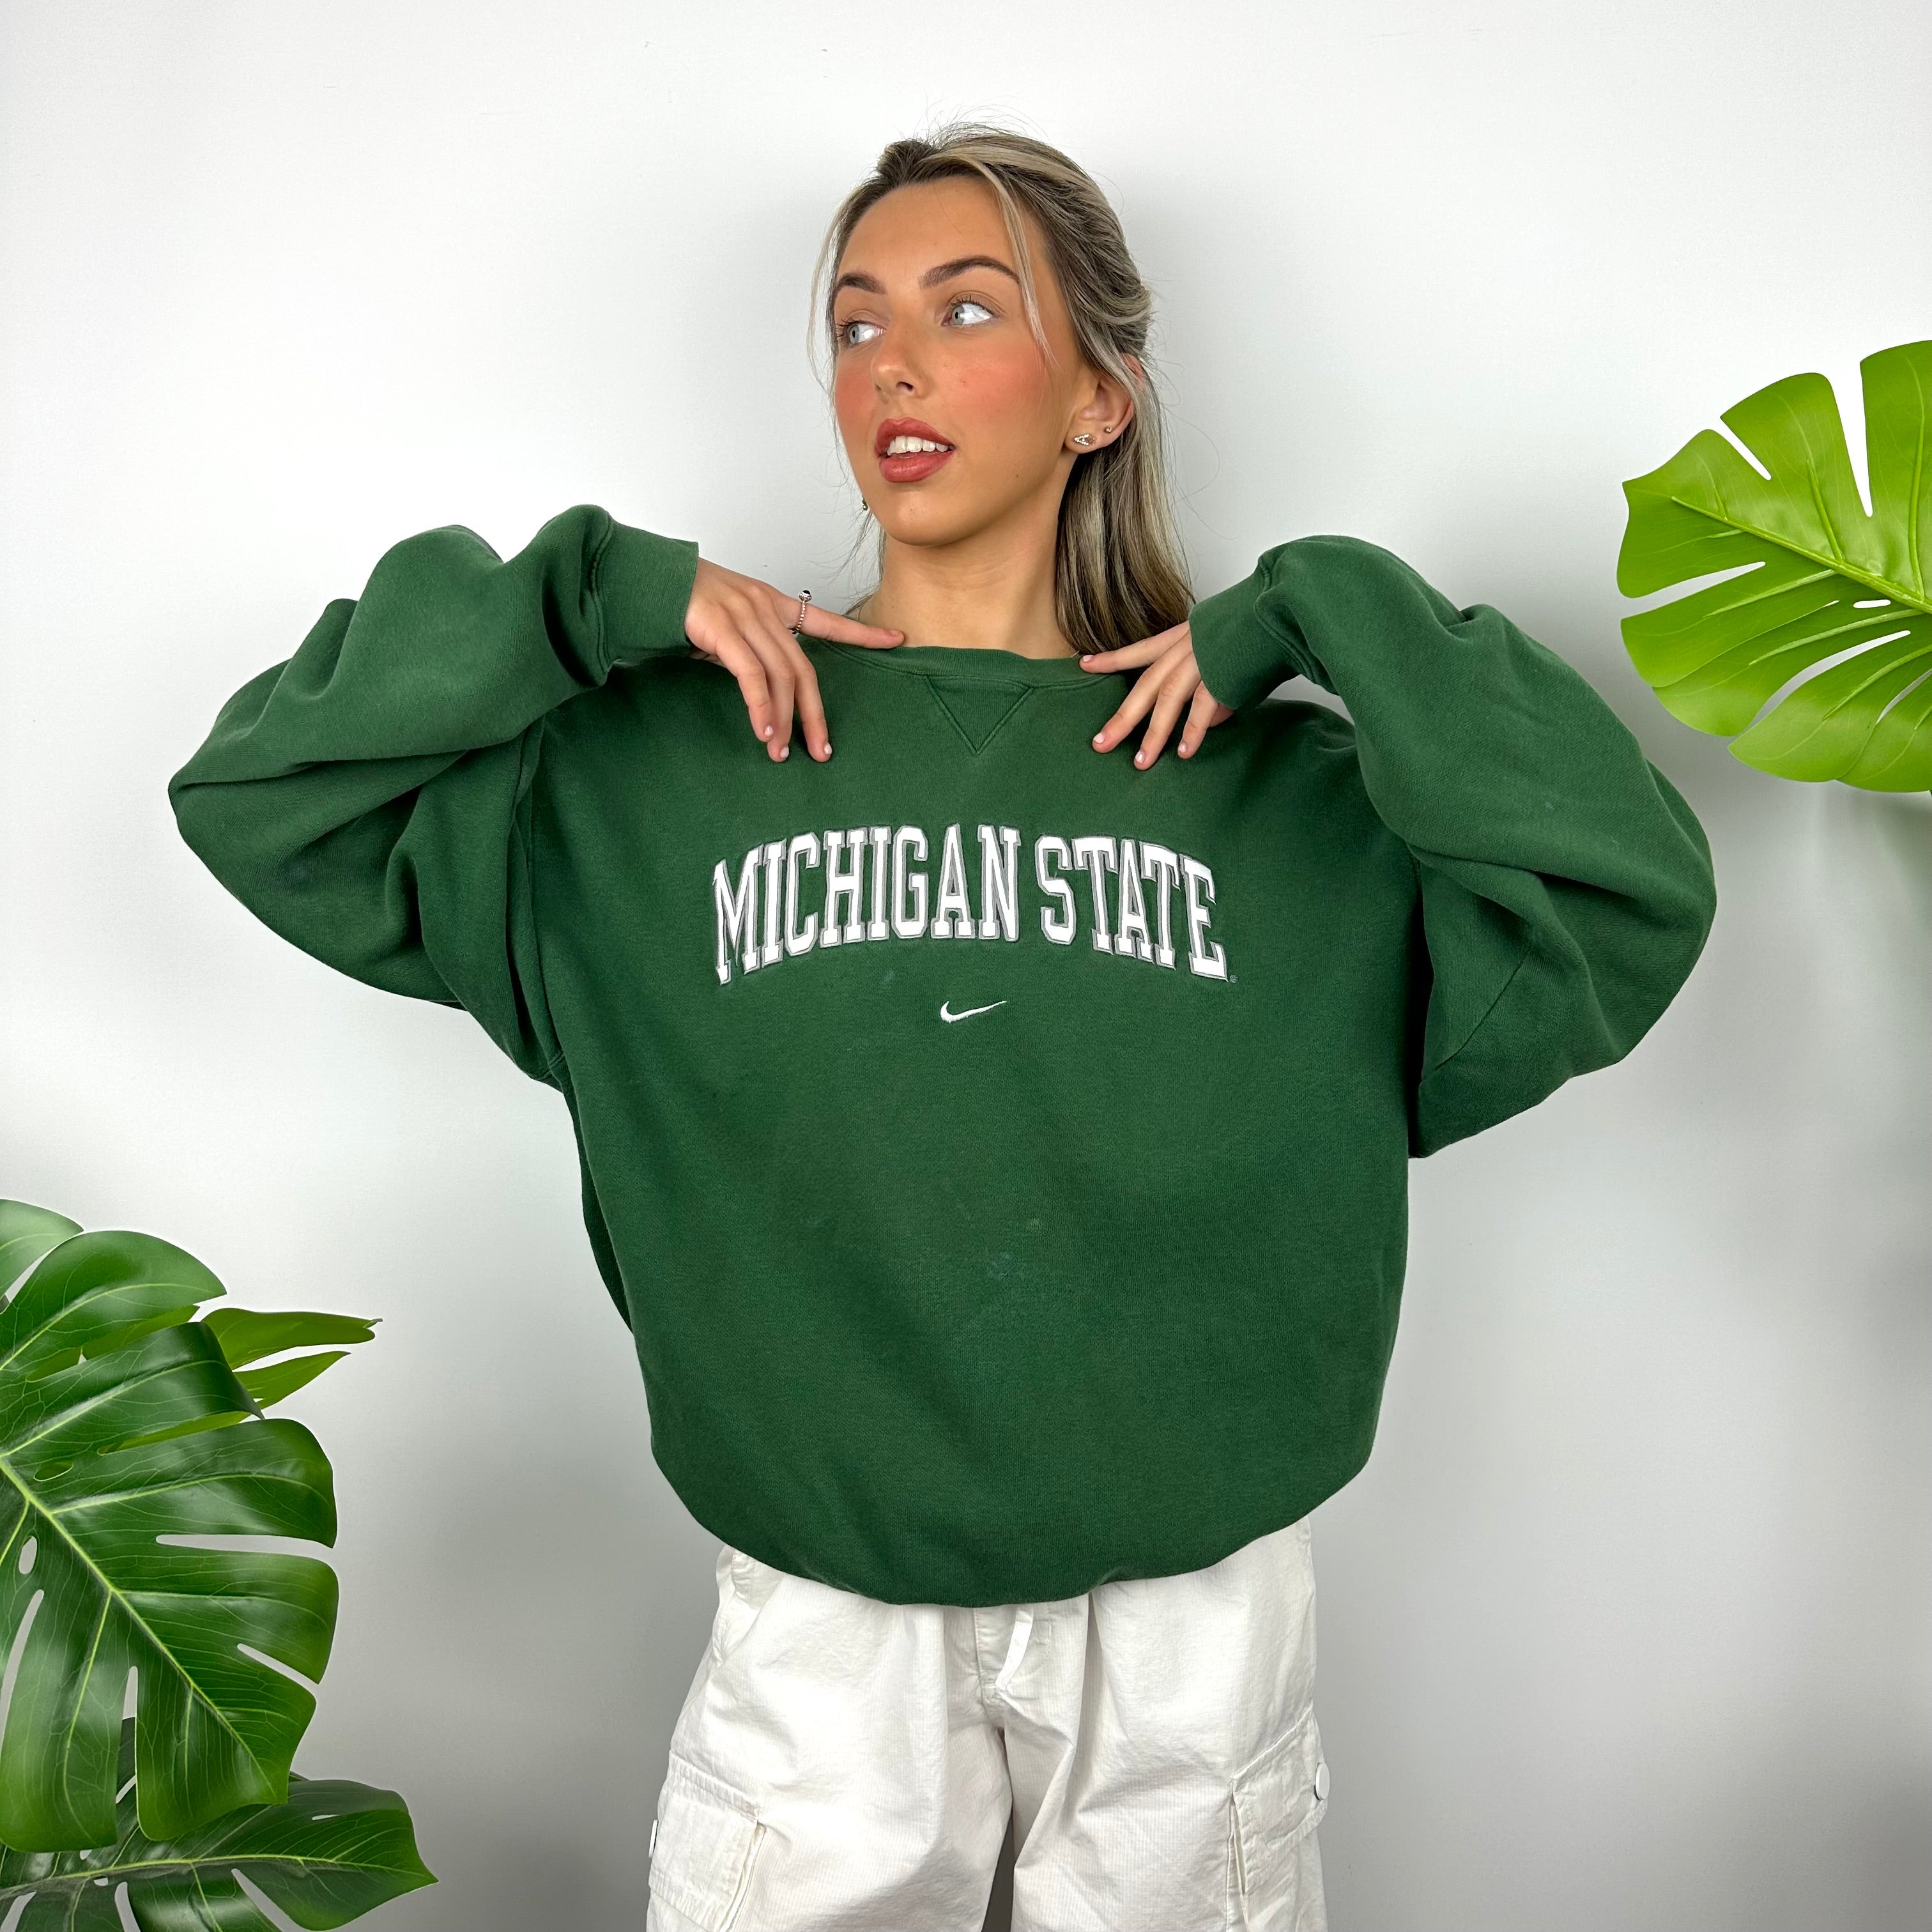 Nike x Michigan State RARE Green Embroidered Spell Out Sweatshirt (L)